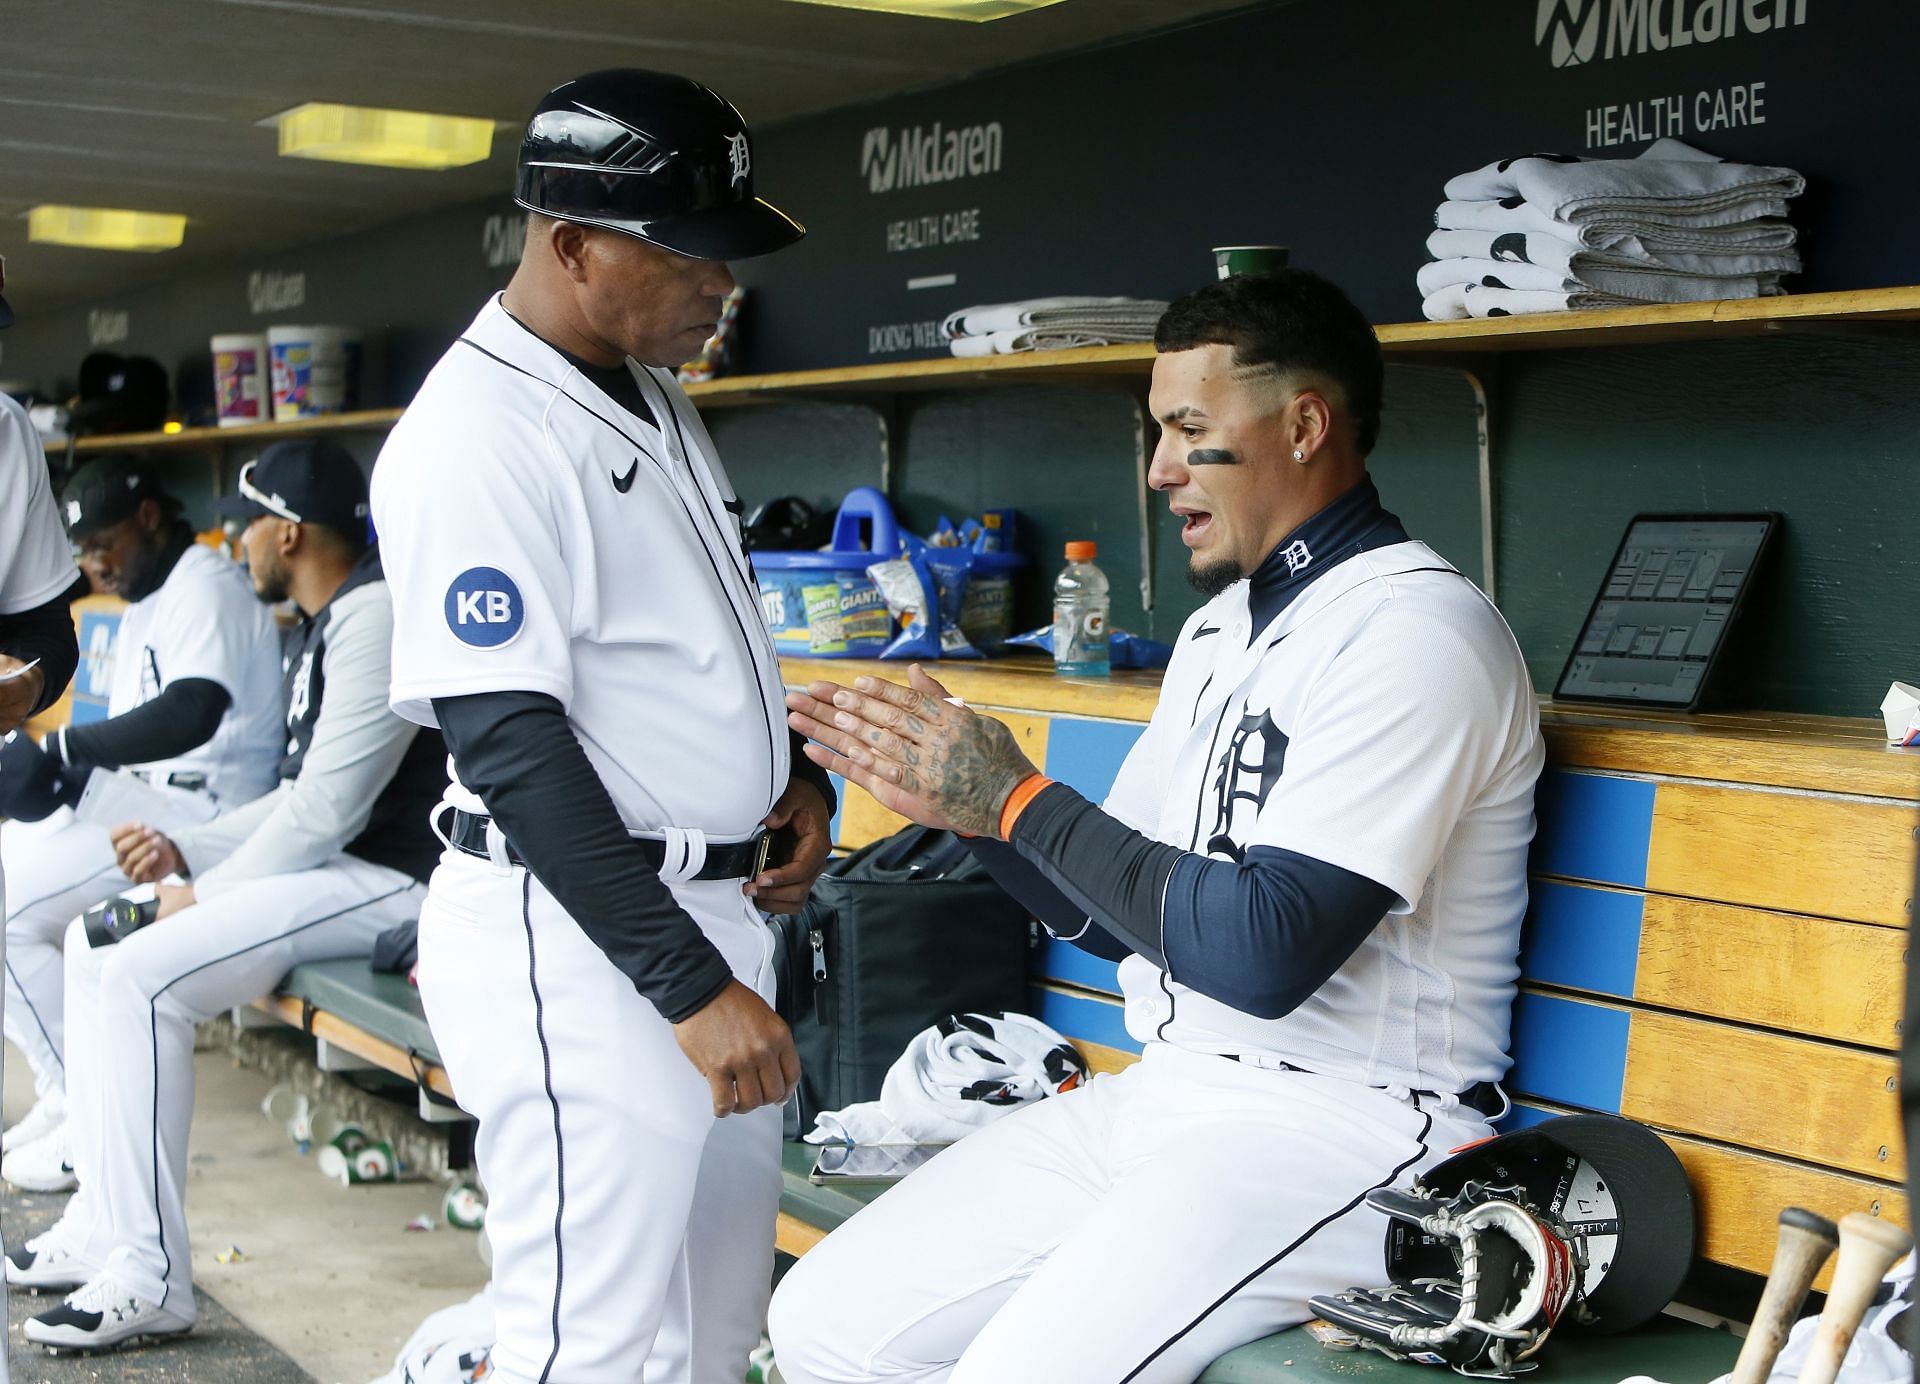 Detroit Tigers shortstop was ejected on Monday following a colorful exchange with an umpire.